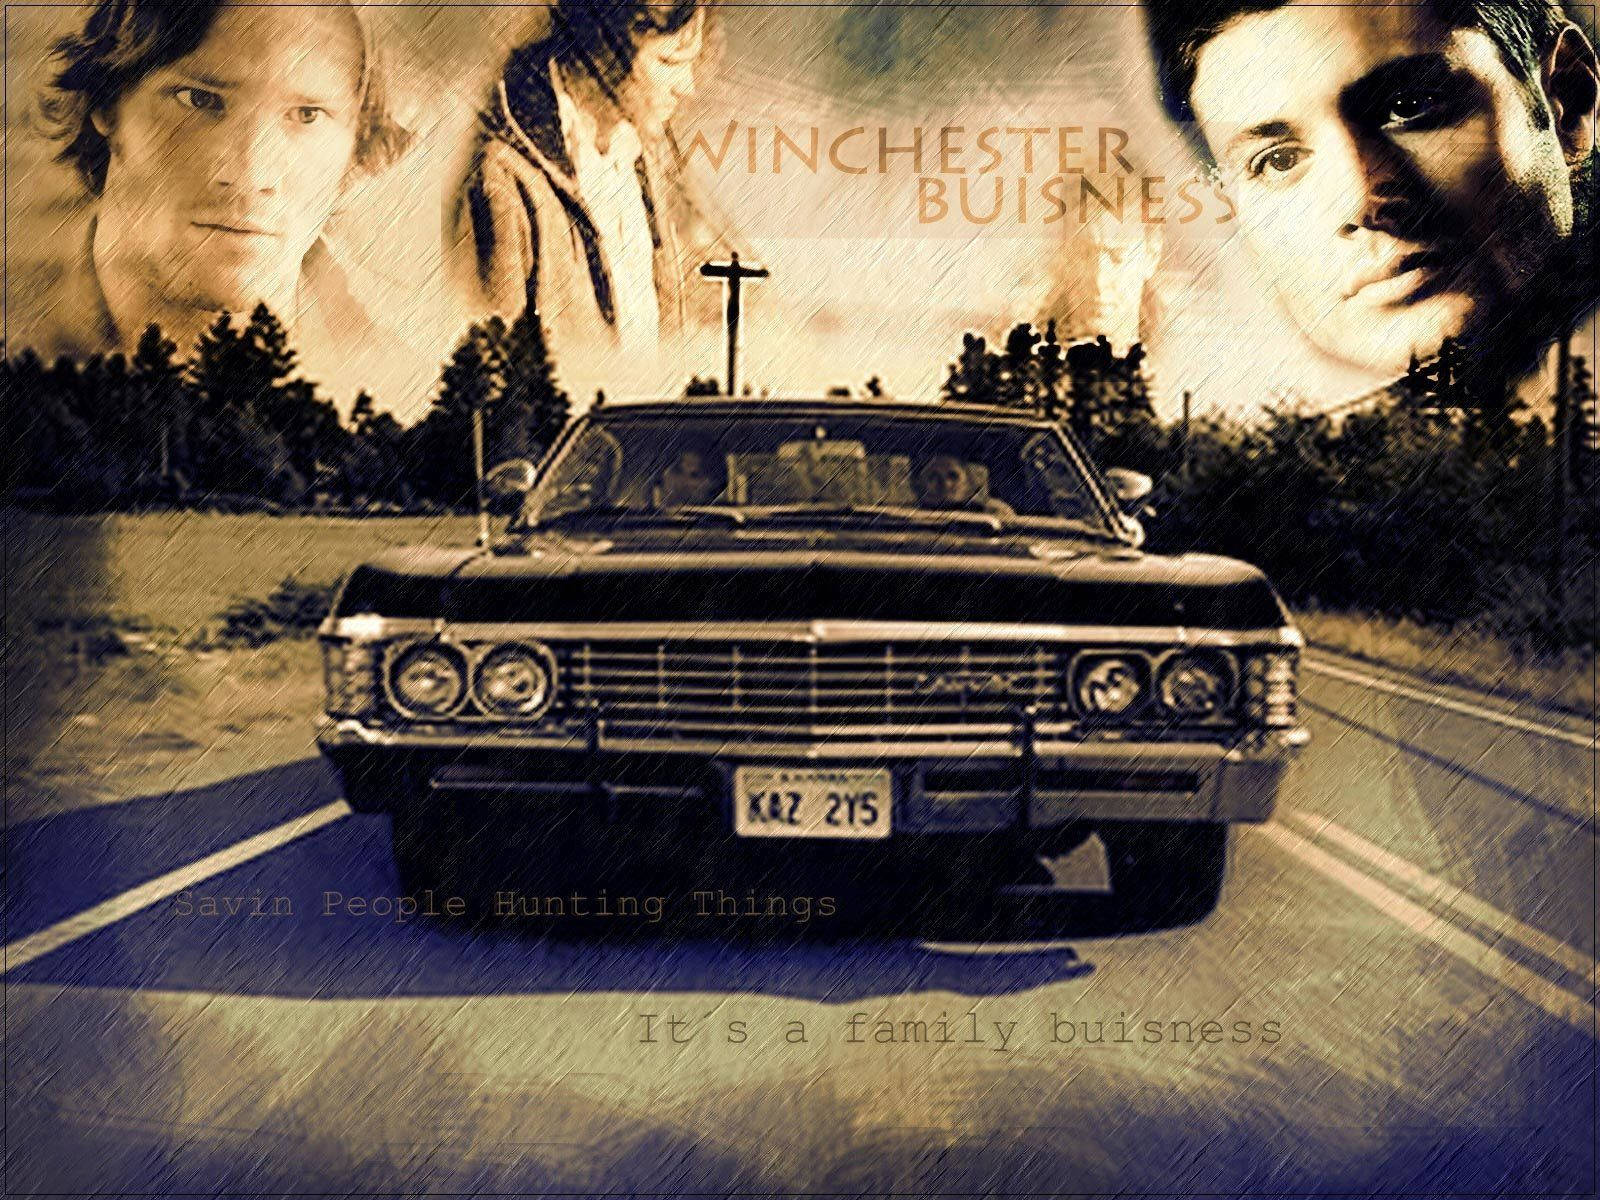 The Winchesters show they mean business with their beloved Impala Wallpaper